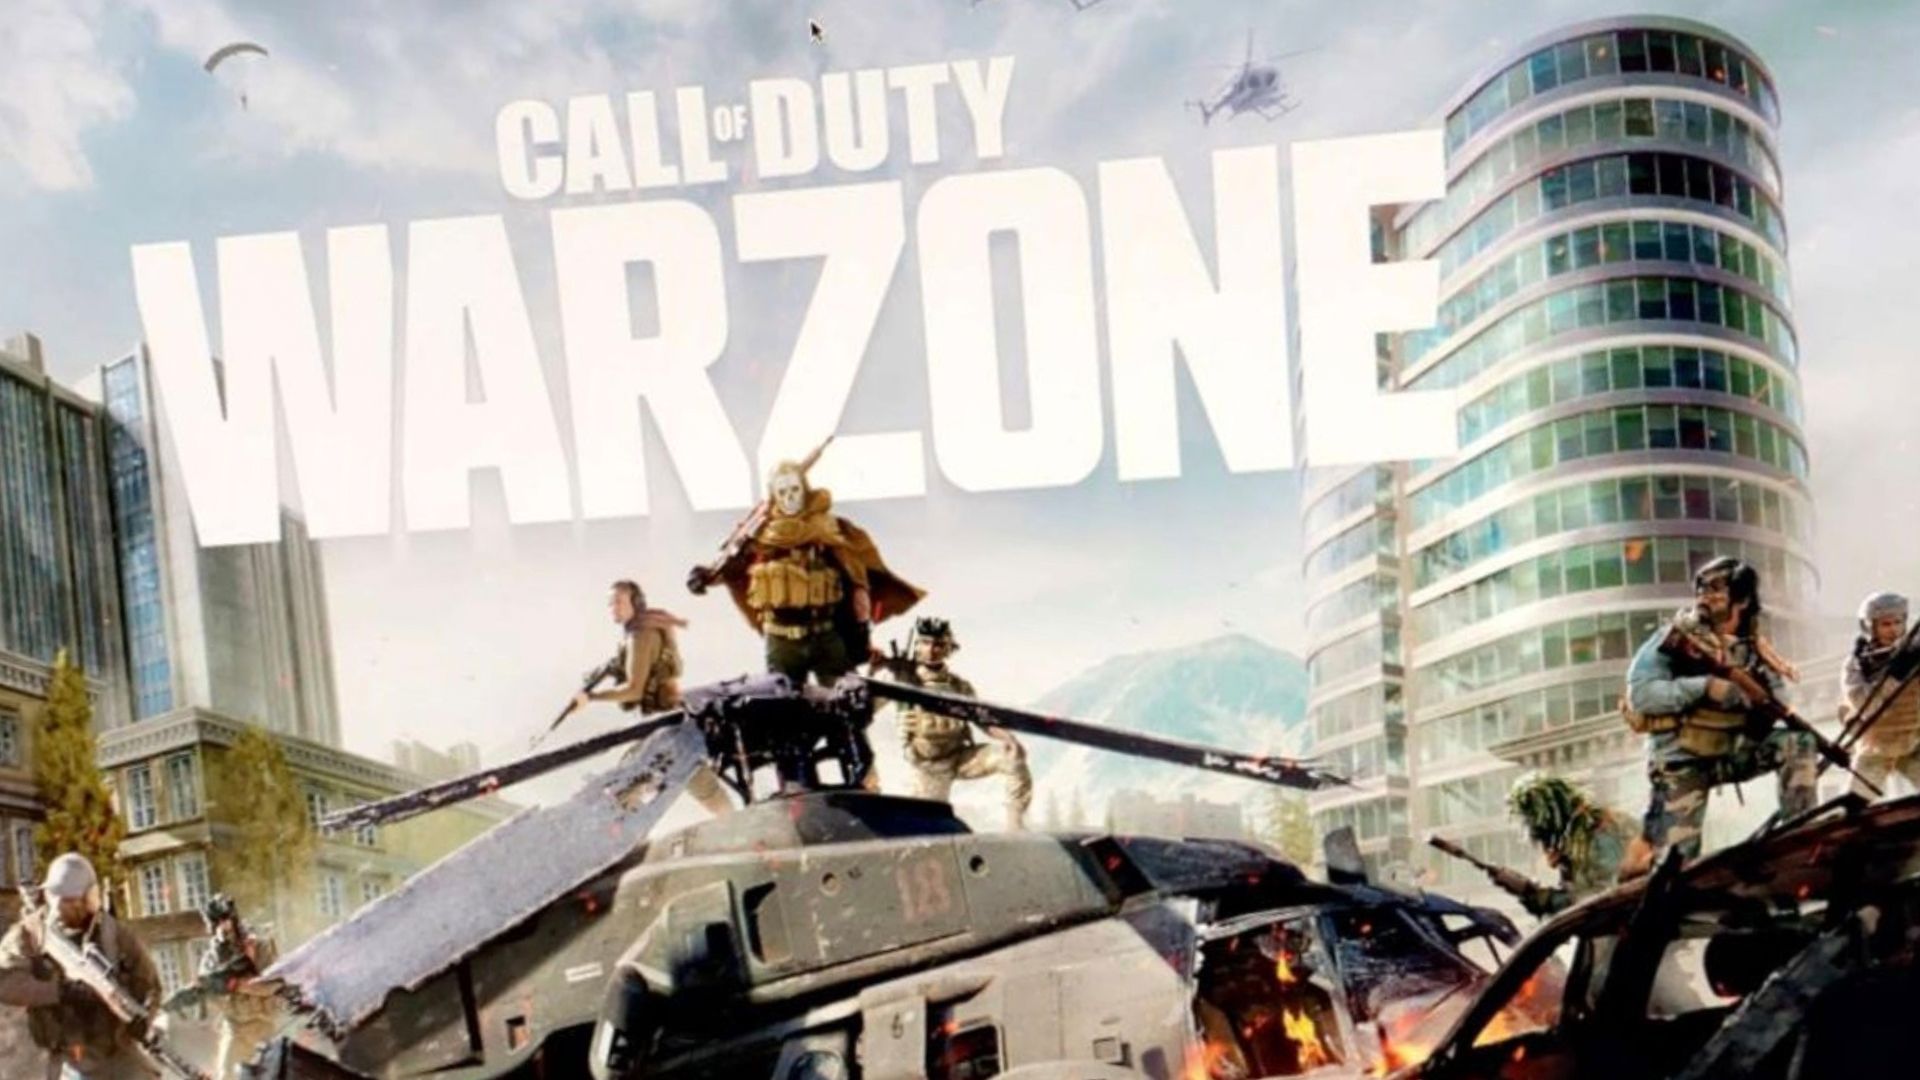 Call of Duty: Warzone image leaks, Activision issues copyright